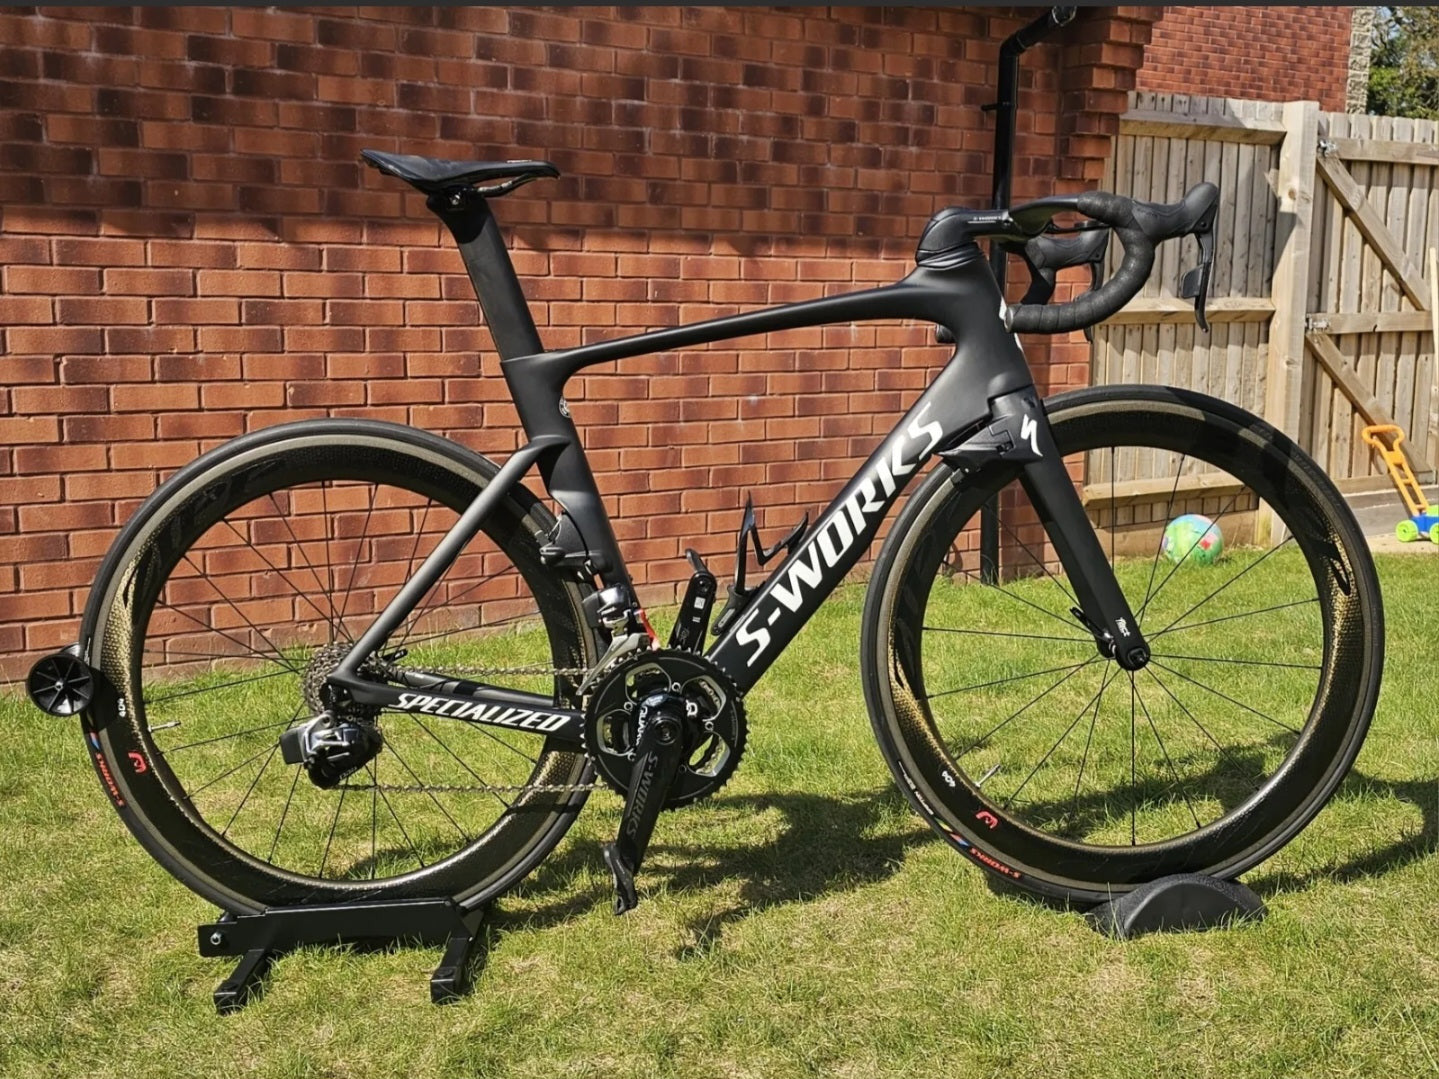 <span style="background-color:rgb(246,247,248);color:rgb(28,30,33);"> Specialized S Works Venge Vias 2017 Road bike </span>